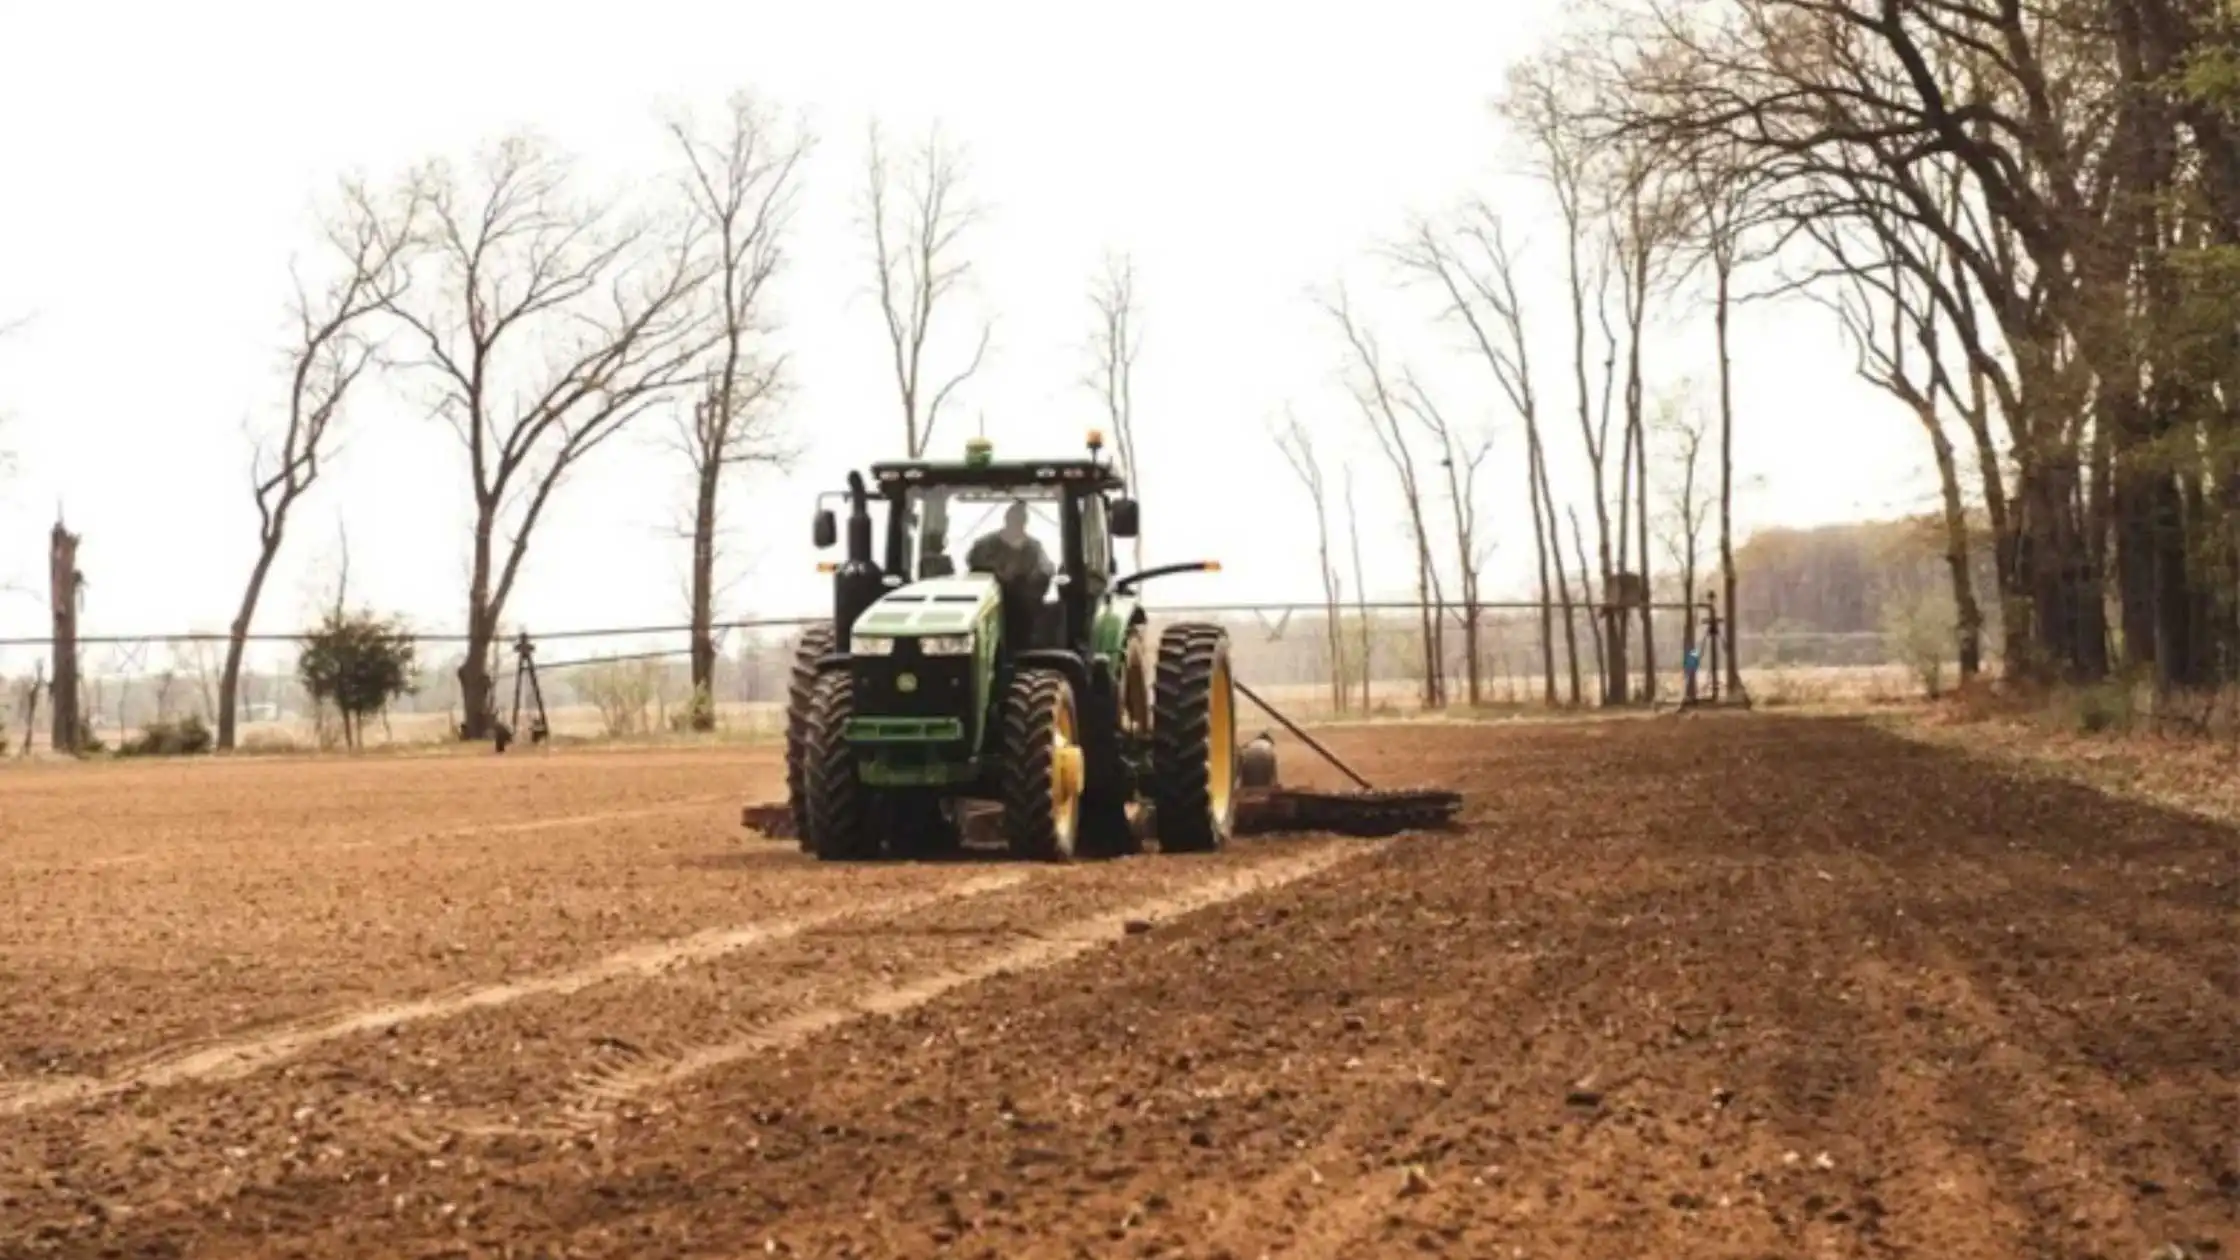 Michigan Based Heartland Industries Receives Grant to Boost Hemp-Centered Soil Research